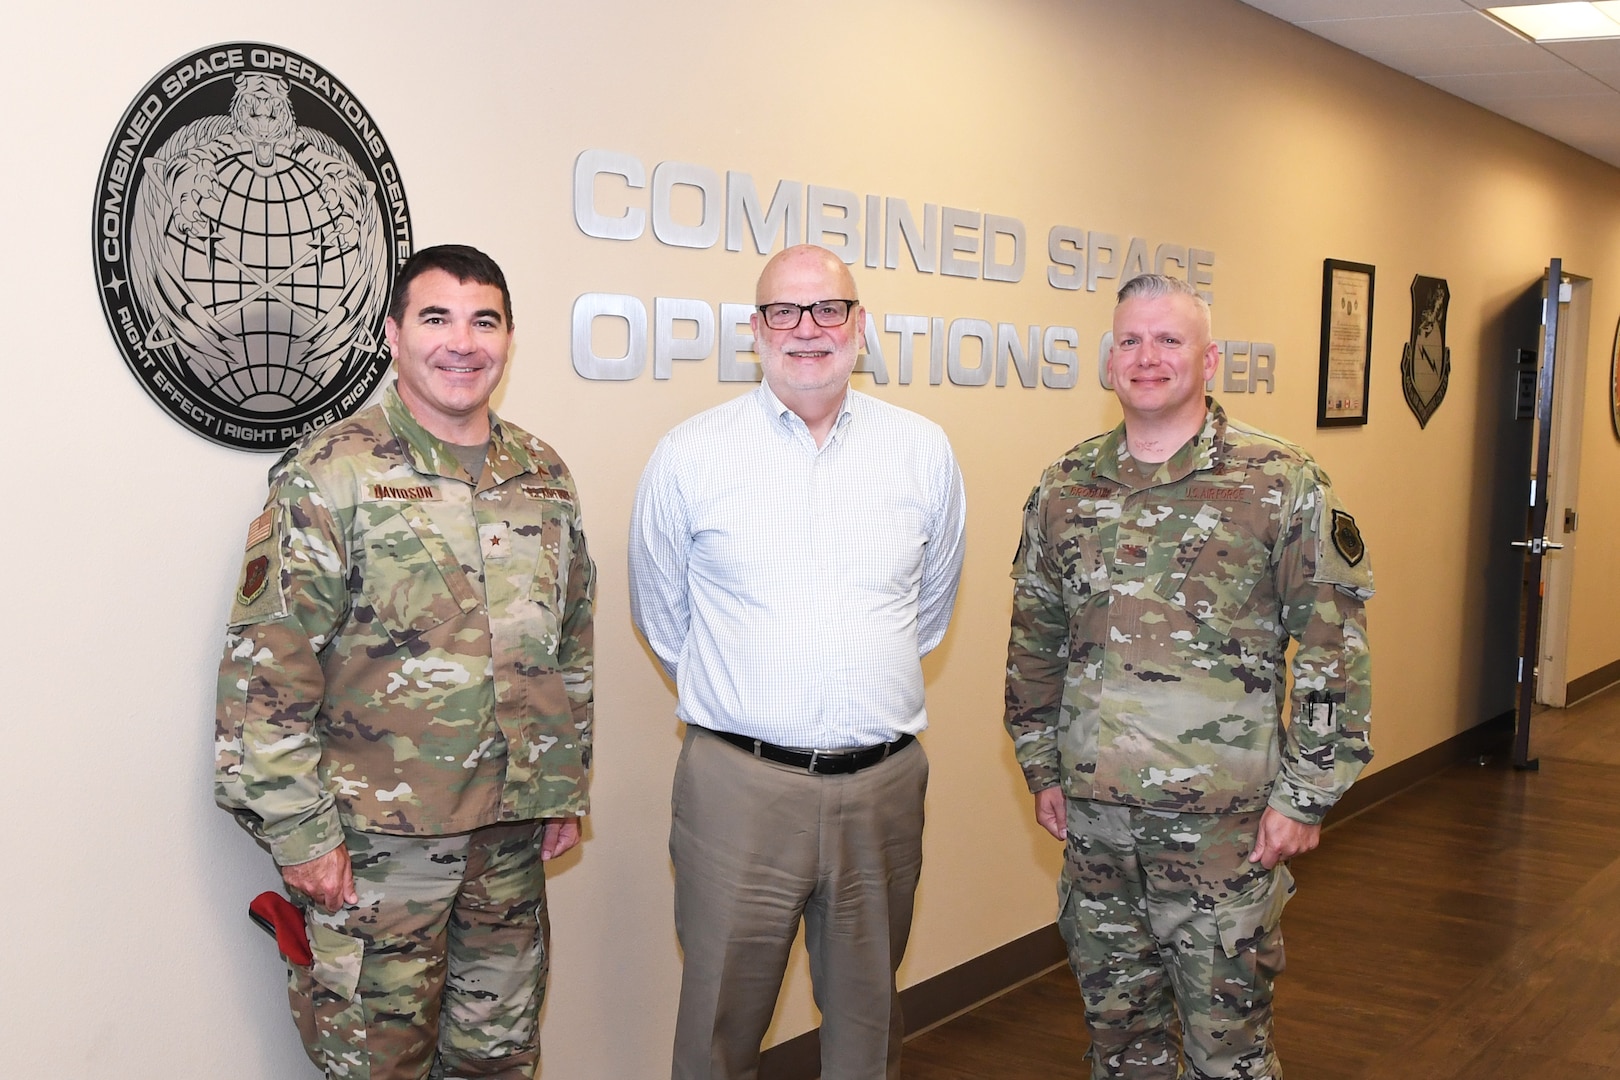 John Roth, performing the duties of the Under Secretary of the Air Force (center), poses for a photo with Brig. Gen. Matthew Davidson, 14th Air Force vice commander (left), and Col. Scott Brodeur, Combined Space Operations Center (CSpOC) director (right), during a visit at Vandenberg AFB, Calif., Aug. 27, 2019